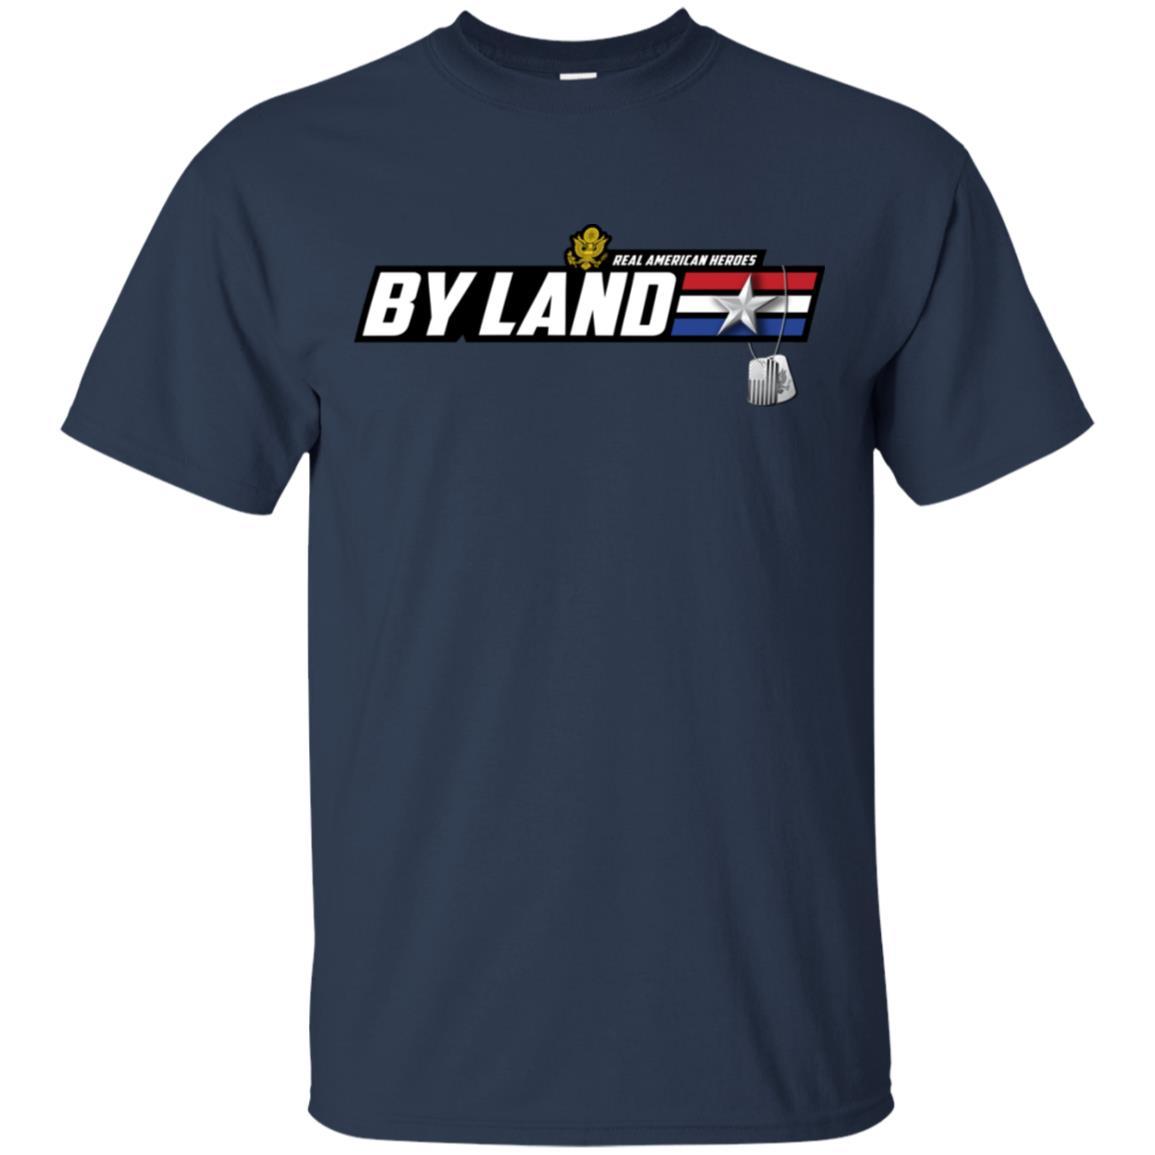 US Army T-Shirt "Real American Heroes By Land" O-7 Brigadier General(BG) On Front-TShirt-Army-Veterans Nation